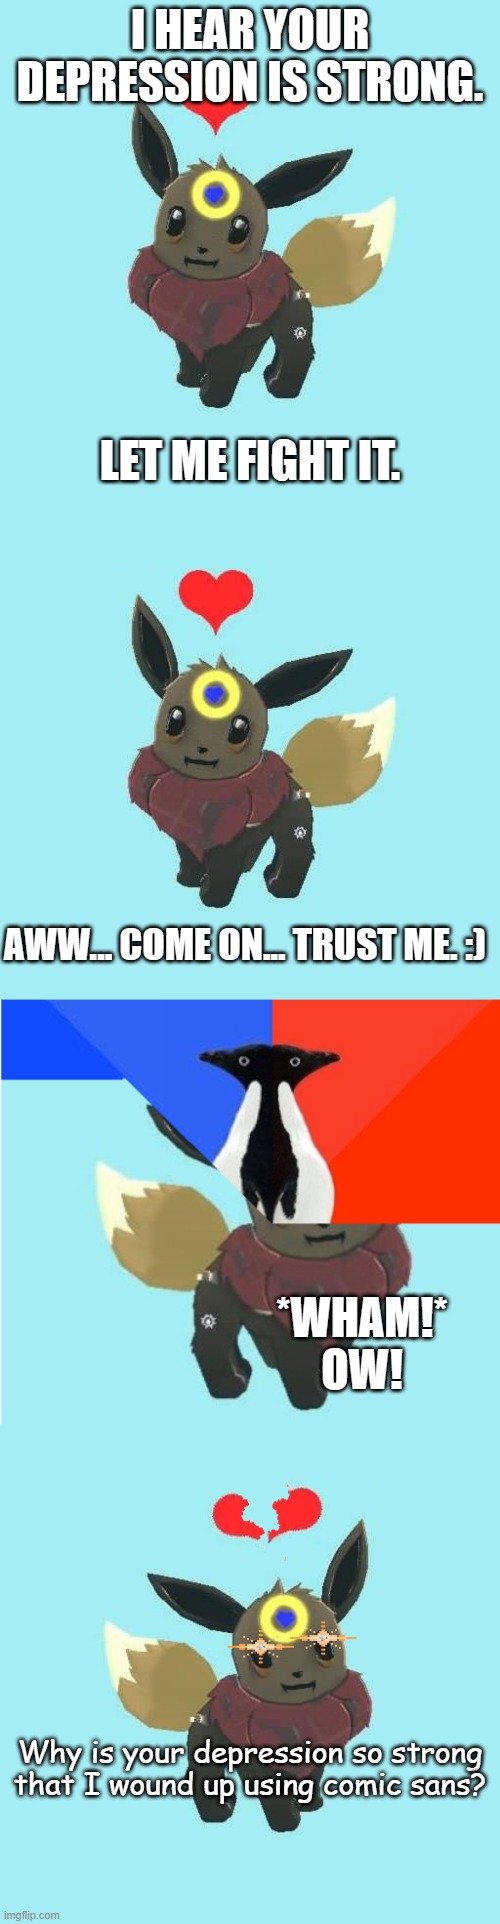 I HEAR YOUR DEPRESSION IS STRONG. LET ME FIGHT IT. AWW... COME ON... TRUST ME. :); *WHAM!* OW! Why is your depression so strong that I wound up using comic sans? | image tagged in far away star the eevee,you broke the meme world huh,far away star the eevee - glare | made w/ Imgflip meme maker